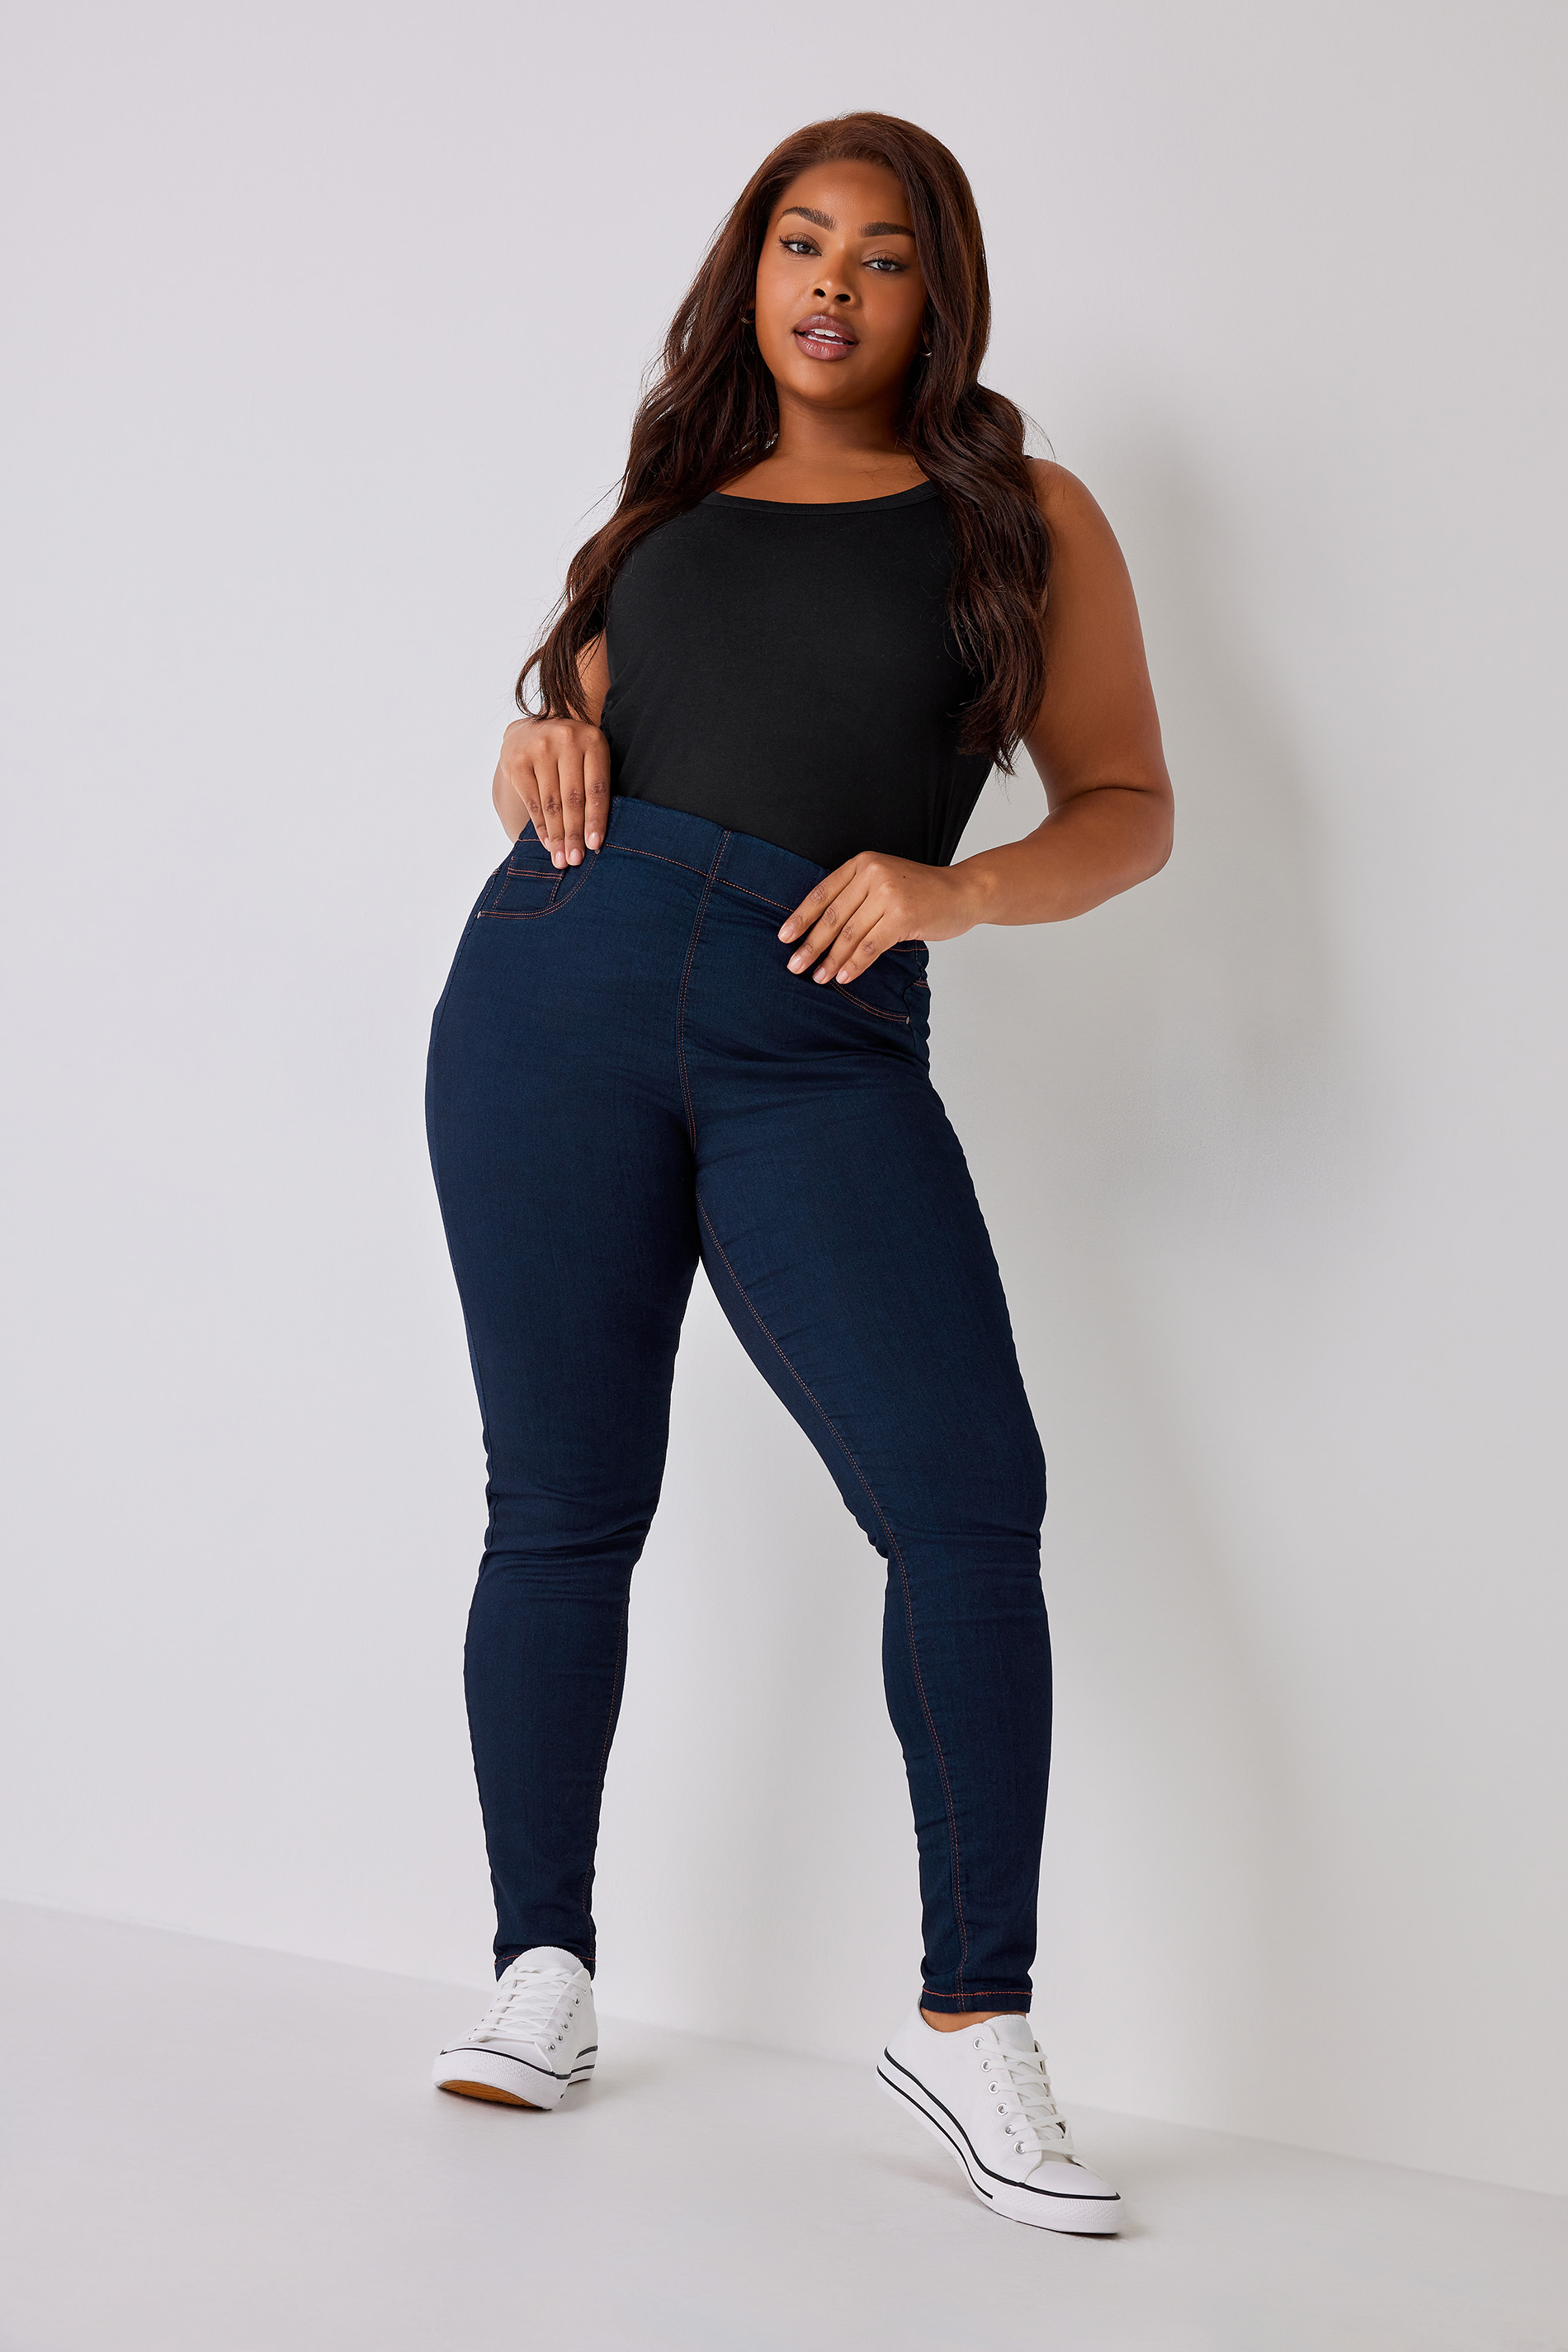 I'm plus-size & tried on jeggings from different supermarkets